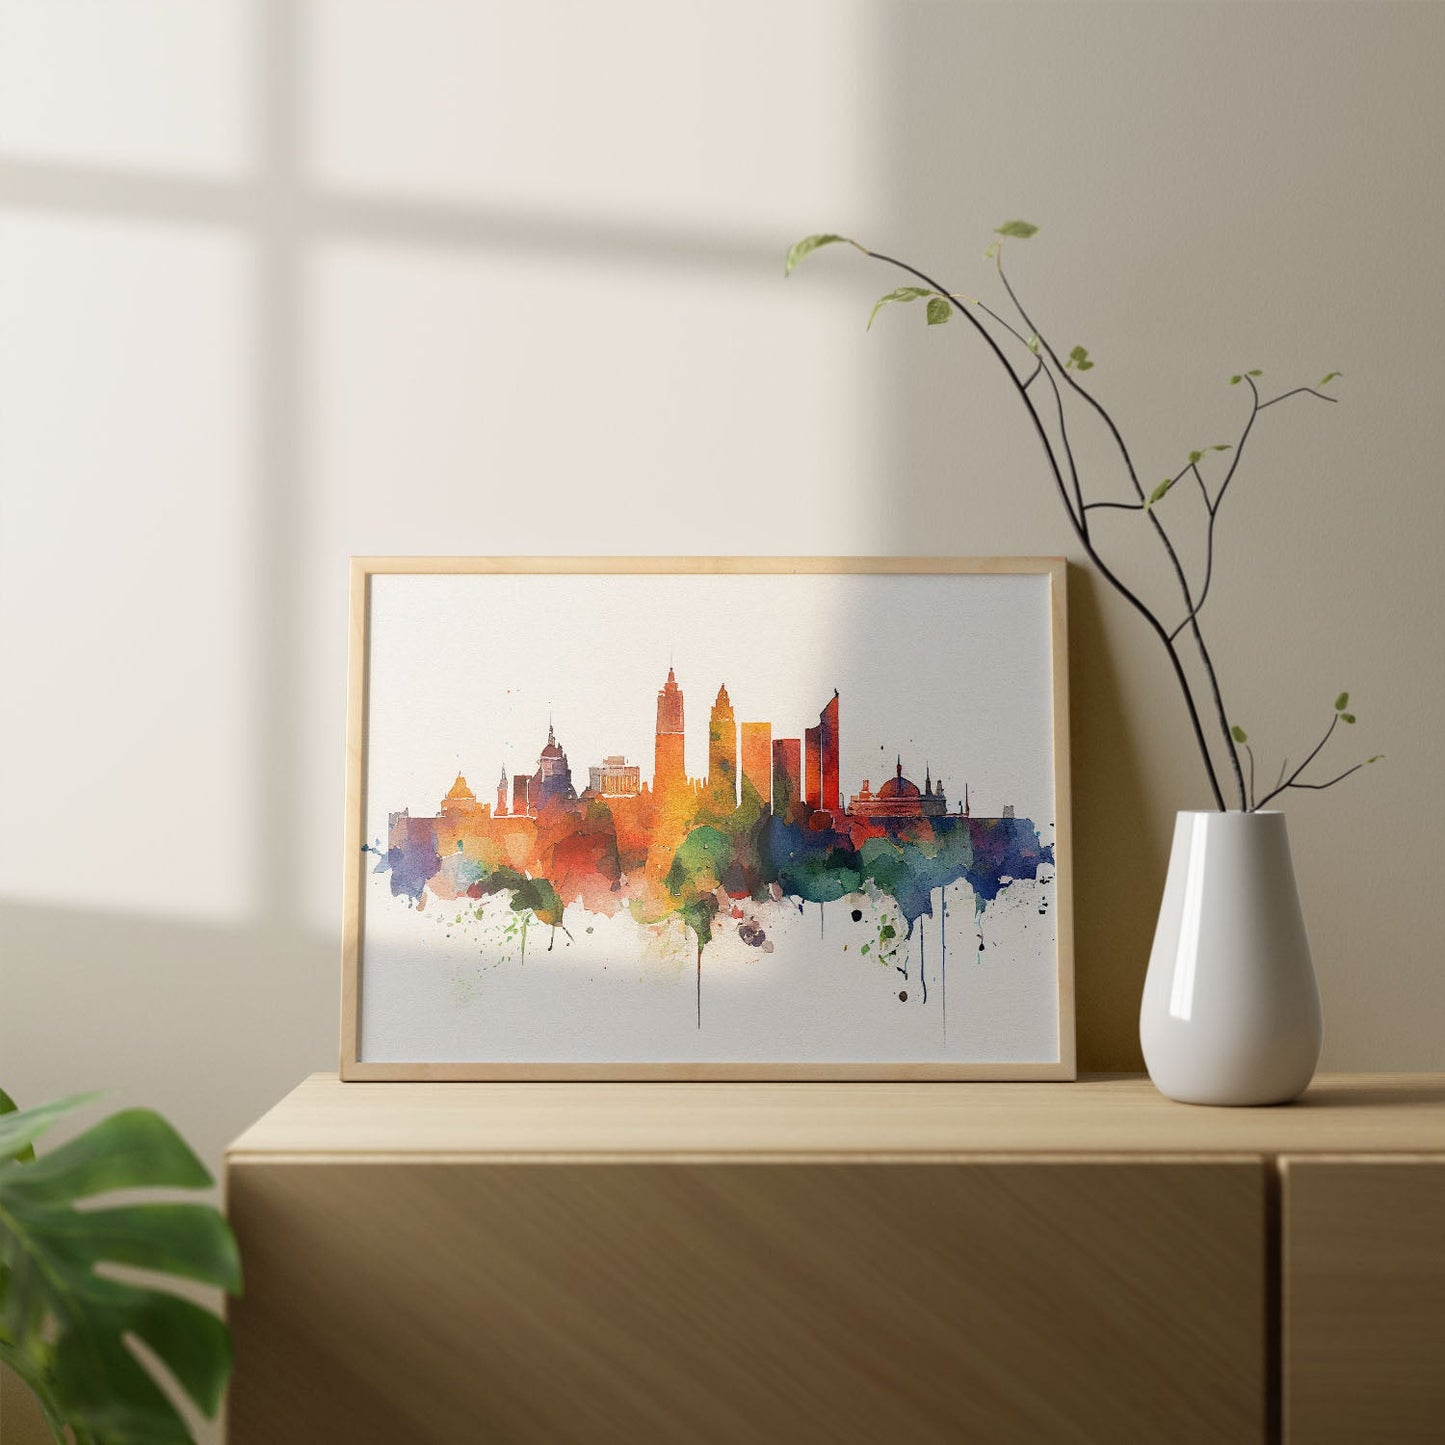 Nacnic watercolor of a skyline of the city of Madrid_3. Aesthetic Wall Art Prints for Bedroom or Living Room Design.